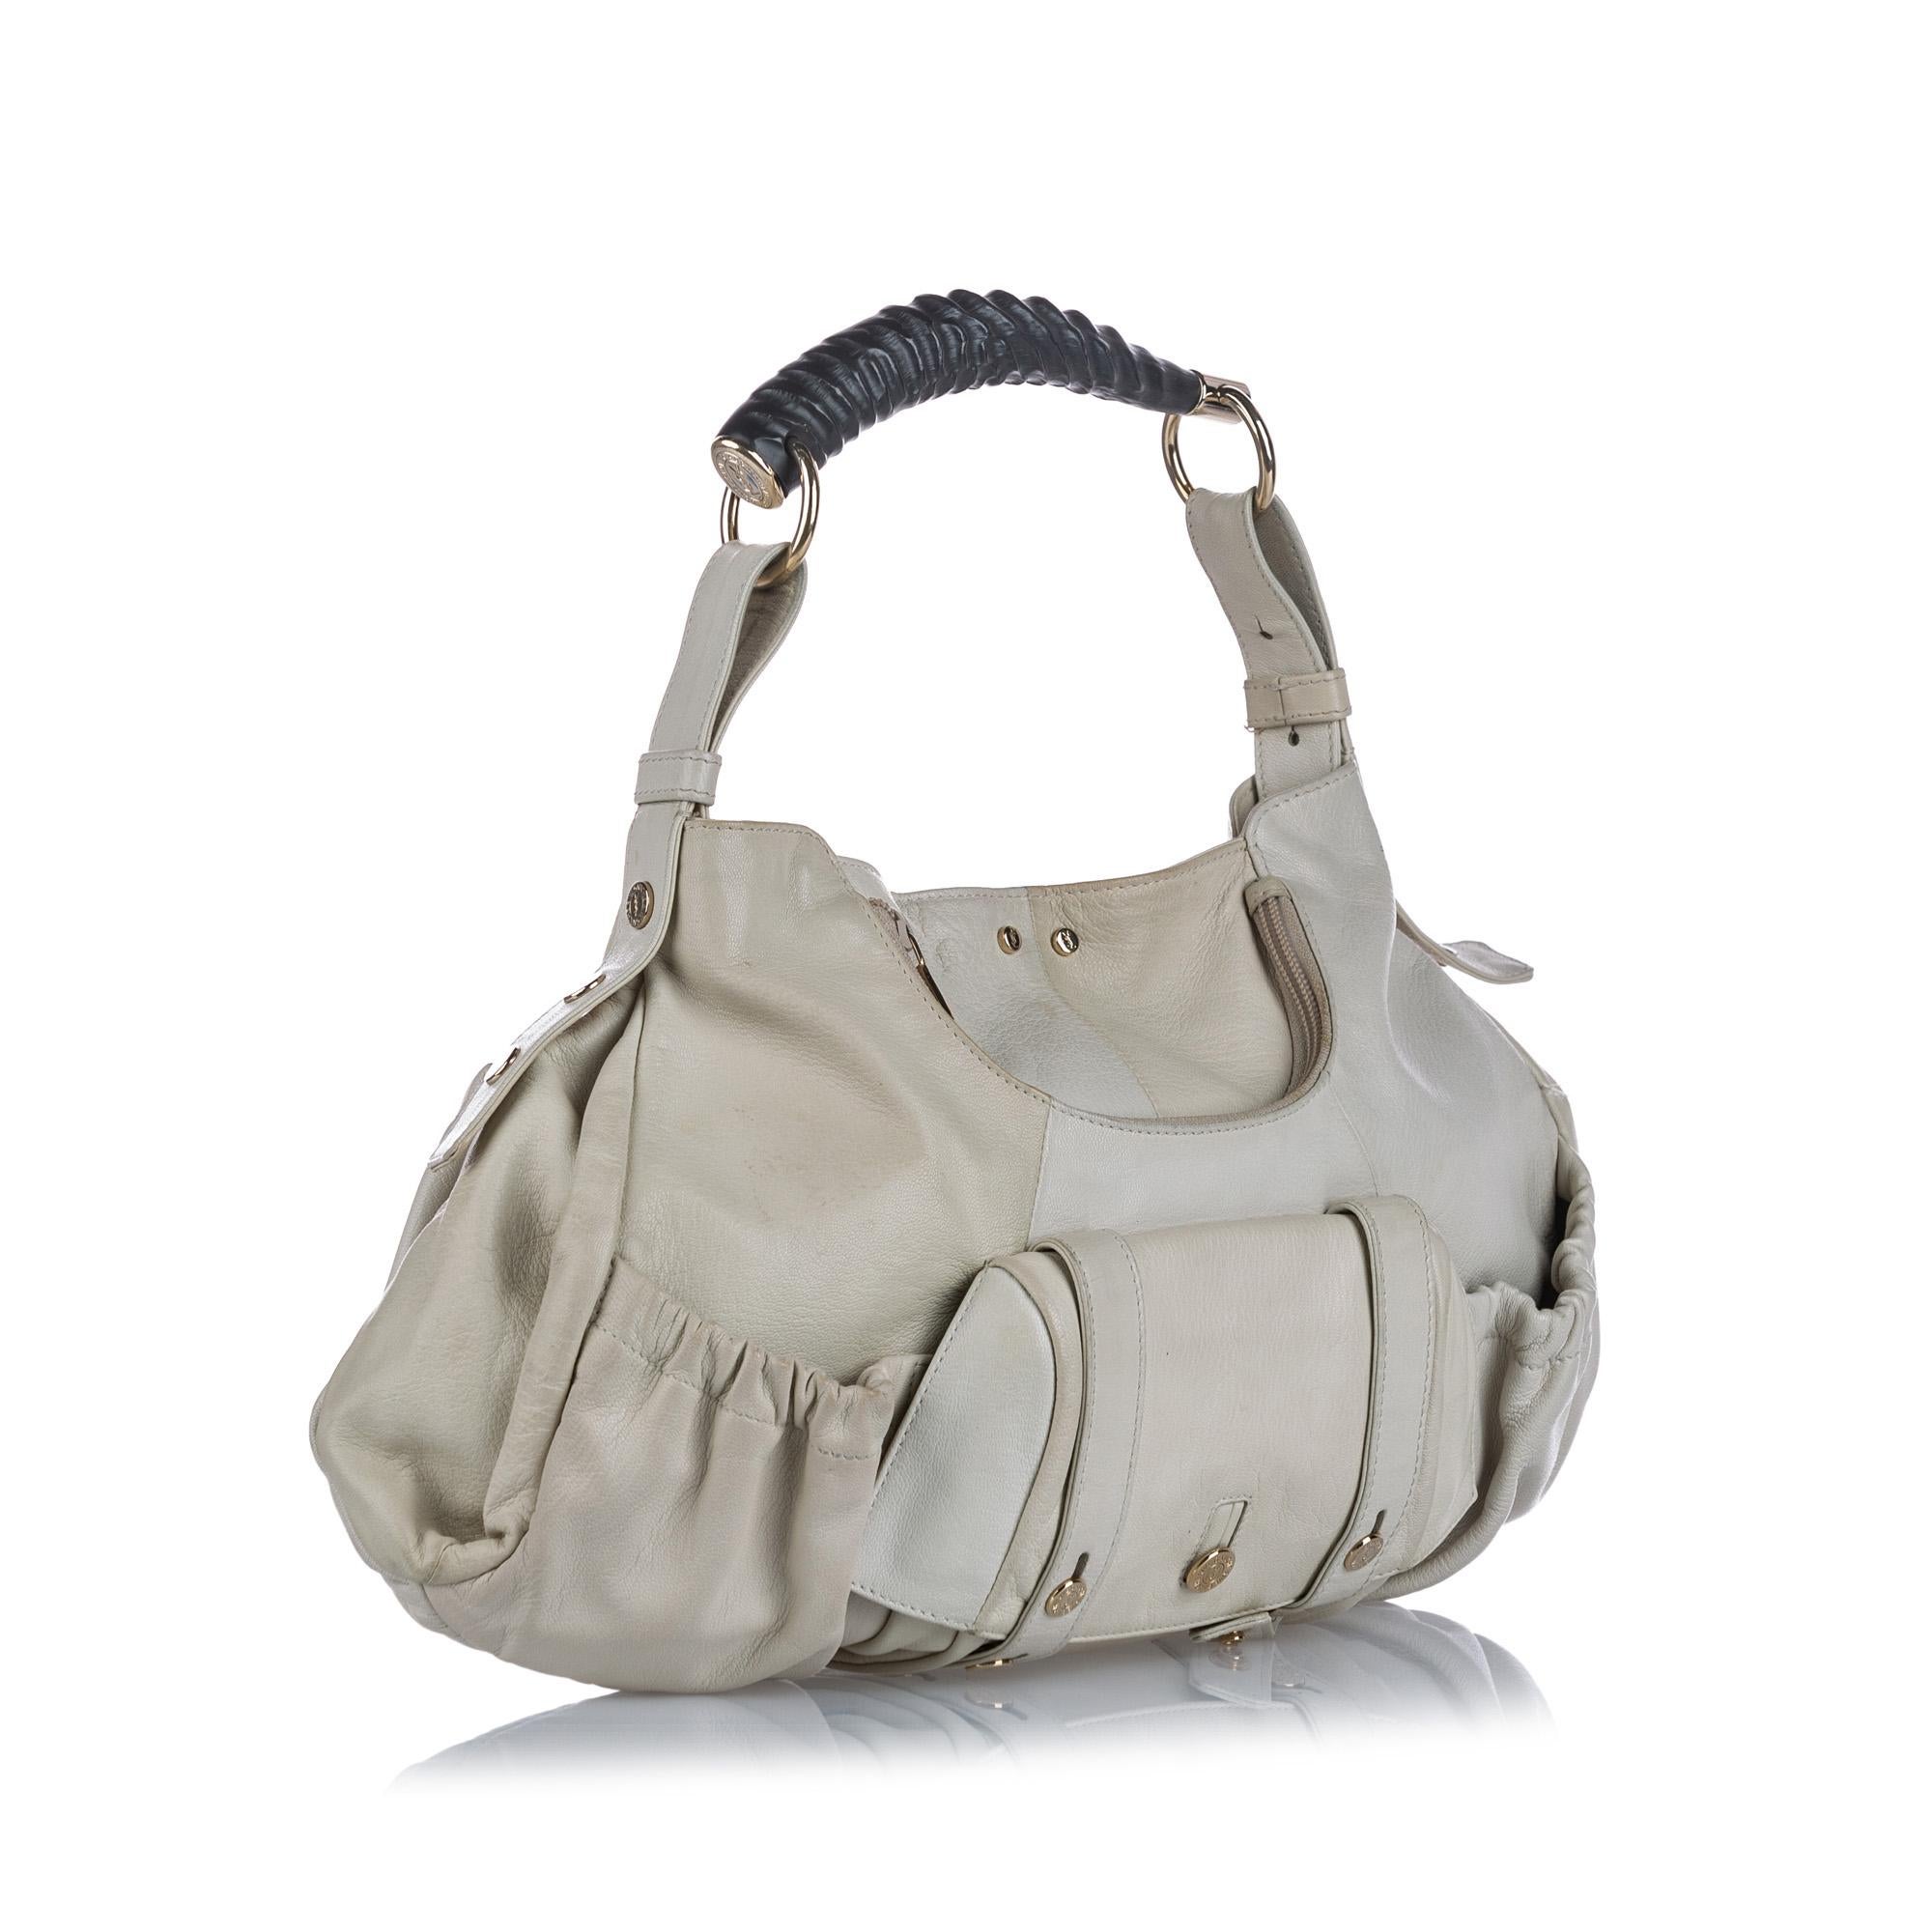 This shoulder bag features a leather body, exterior zip, slip, and flap pockets, a Mombasa handle, an open top with a button closure, and an interior zip pocket. It carries as B condition rating.

Inclusions: 
This item does not come with